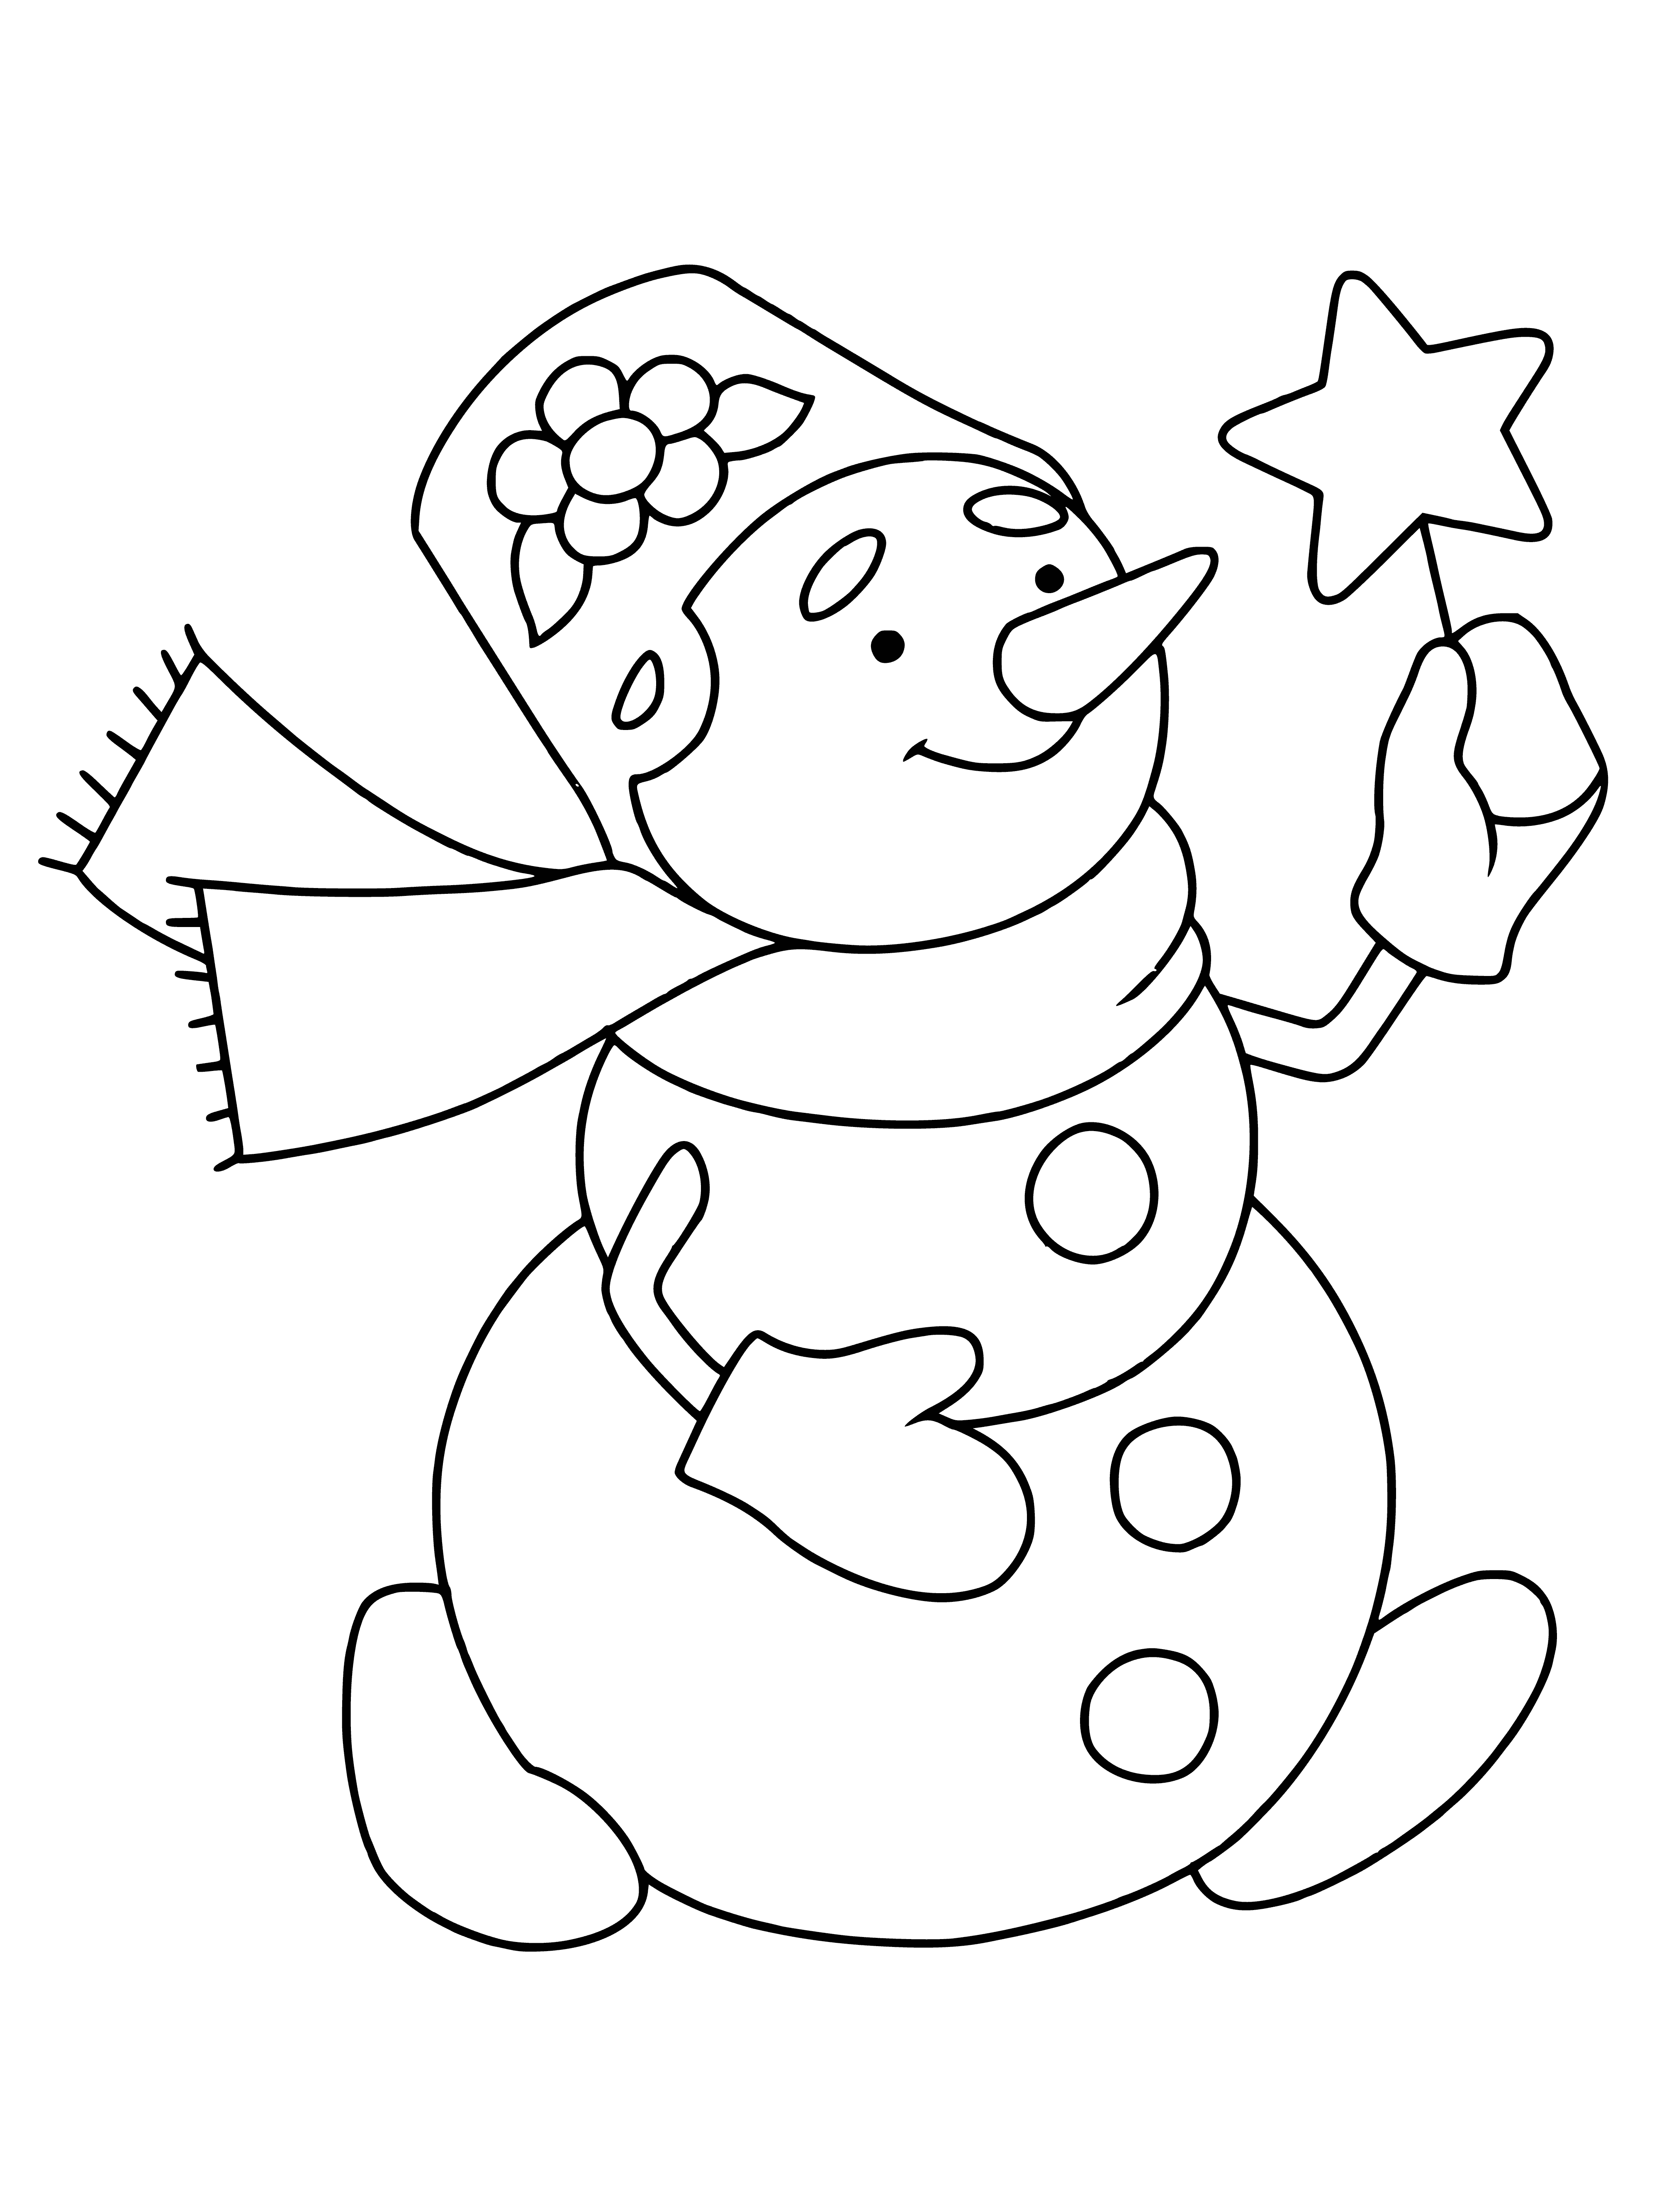 coloring page: Three snowmen, one large and two small, have unique accessories: carrot nose, coal eyes, red/blue scarves and a black top hat.